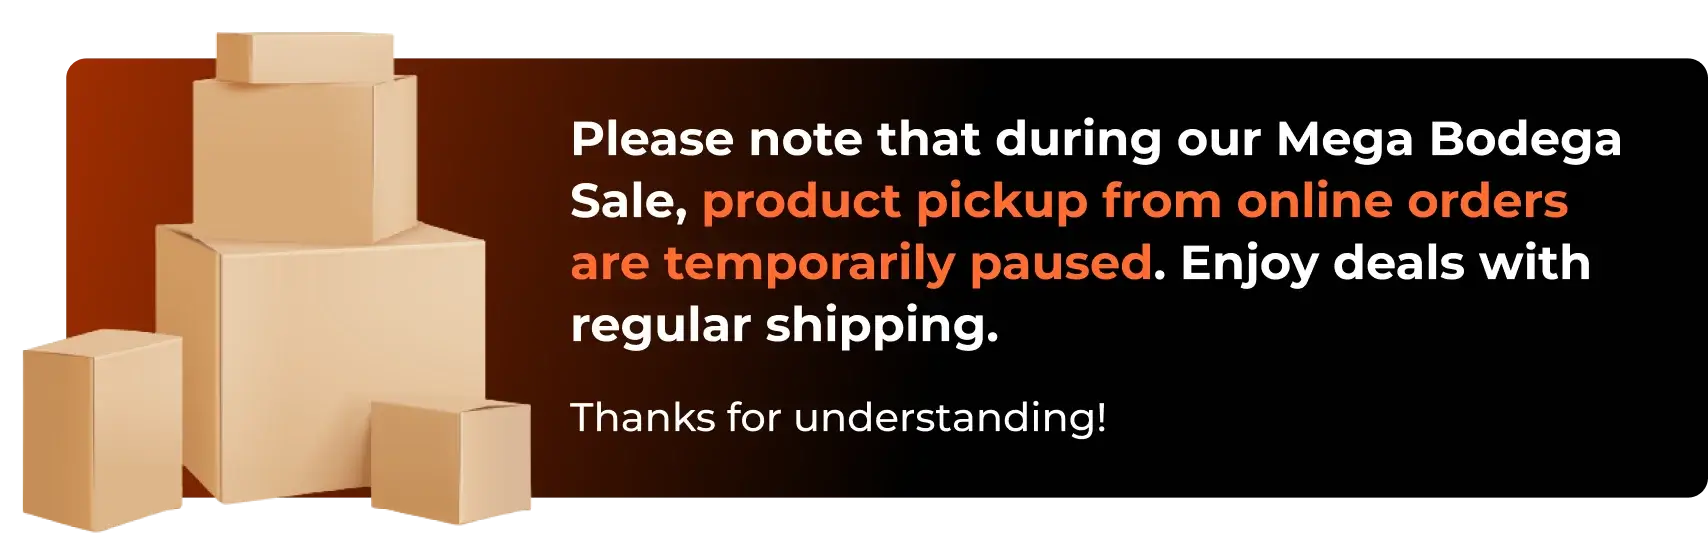 Please note that during our Mega Bodega Sale, product pickup from online orders are temporarily paused. Enjoy deals with regular shipping. Thanks for understanding!